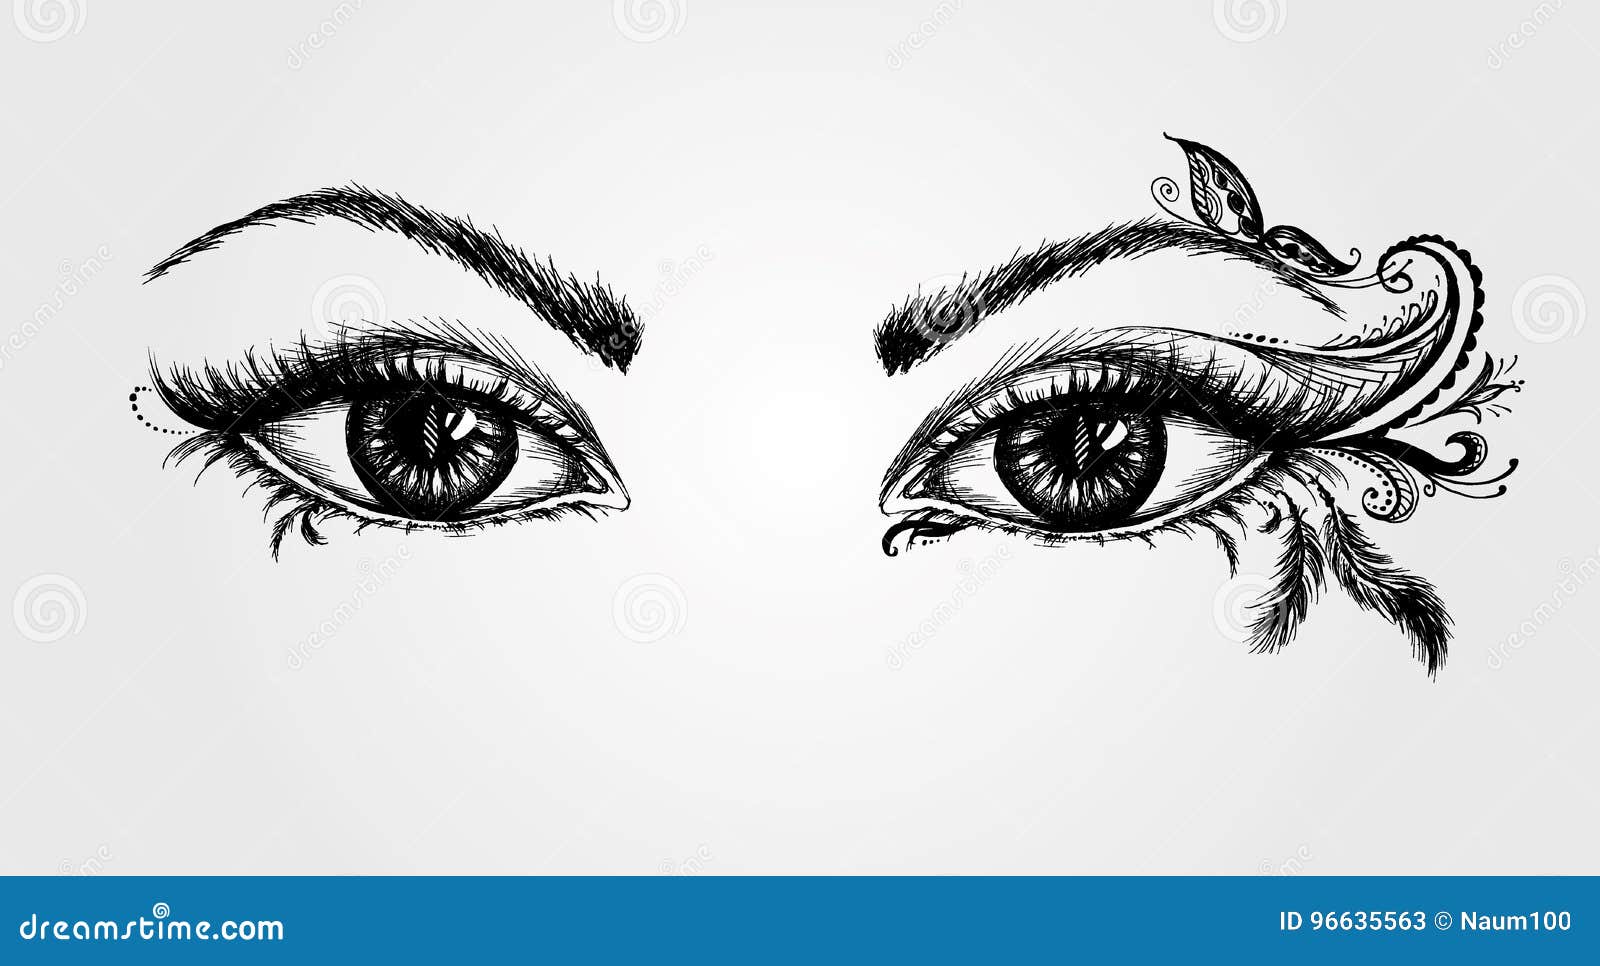 I drew a pair of old and wise eyes. : r/drawing